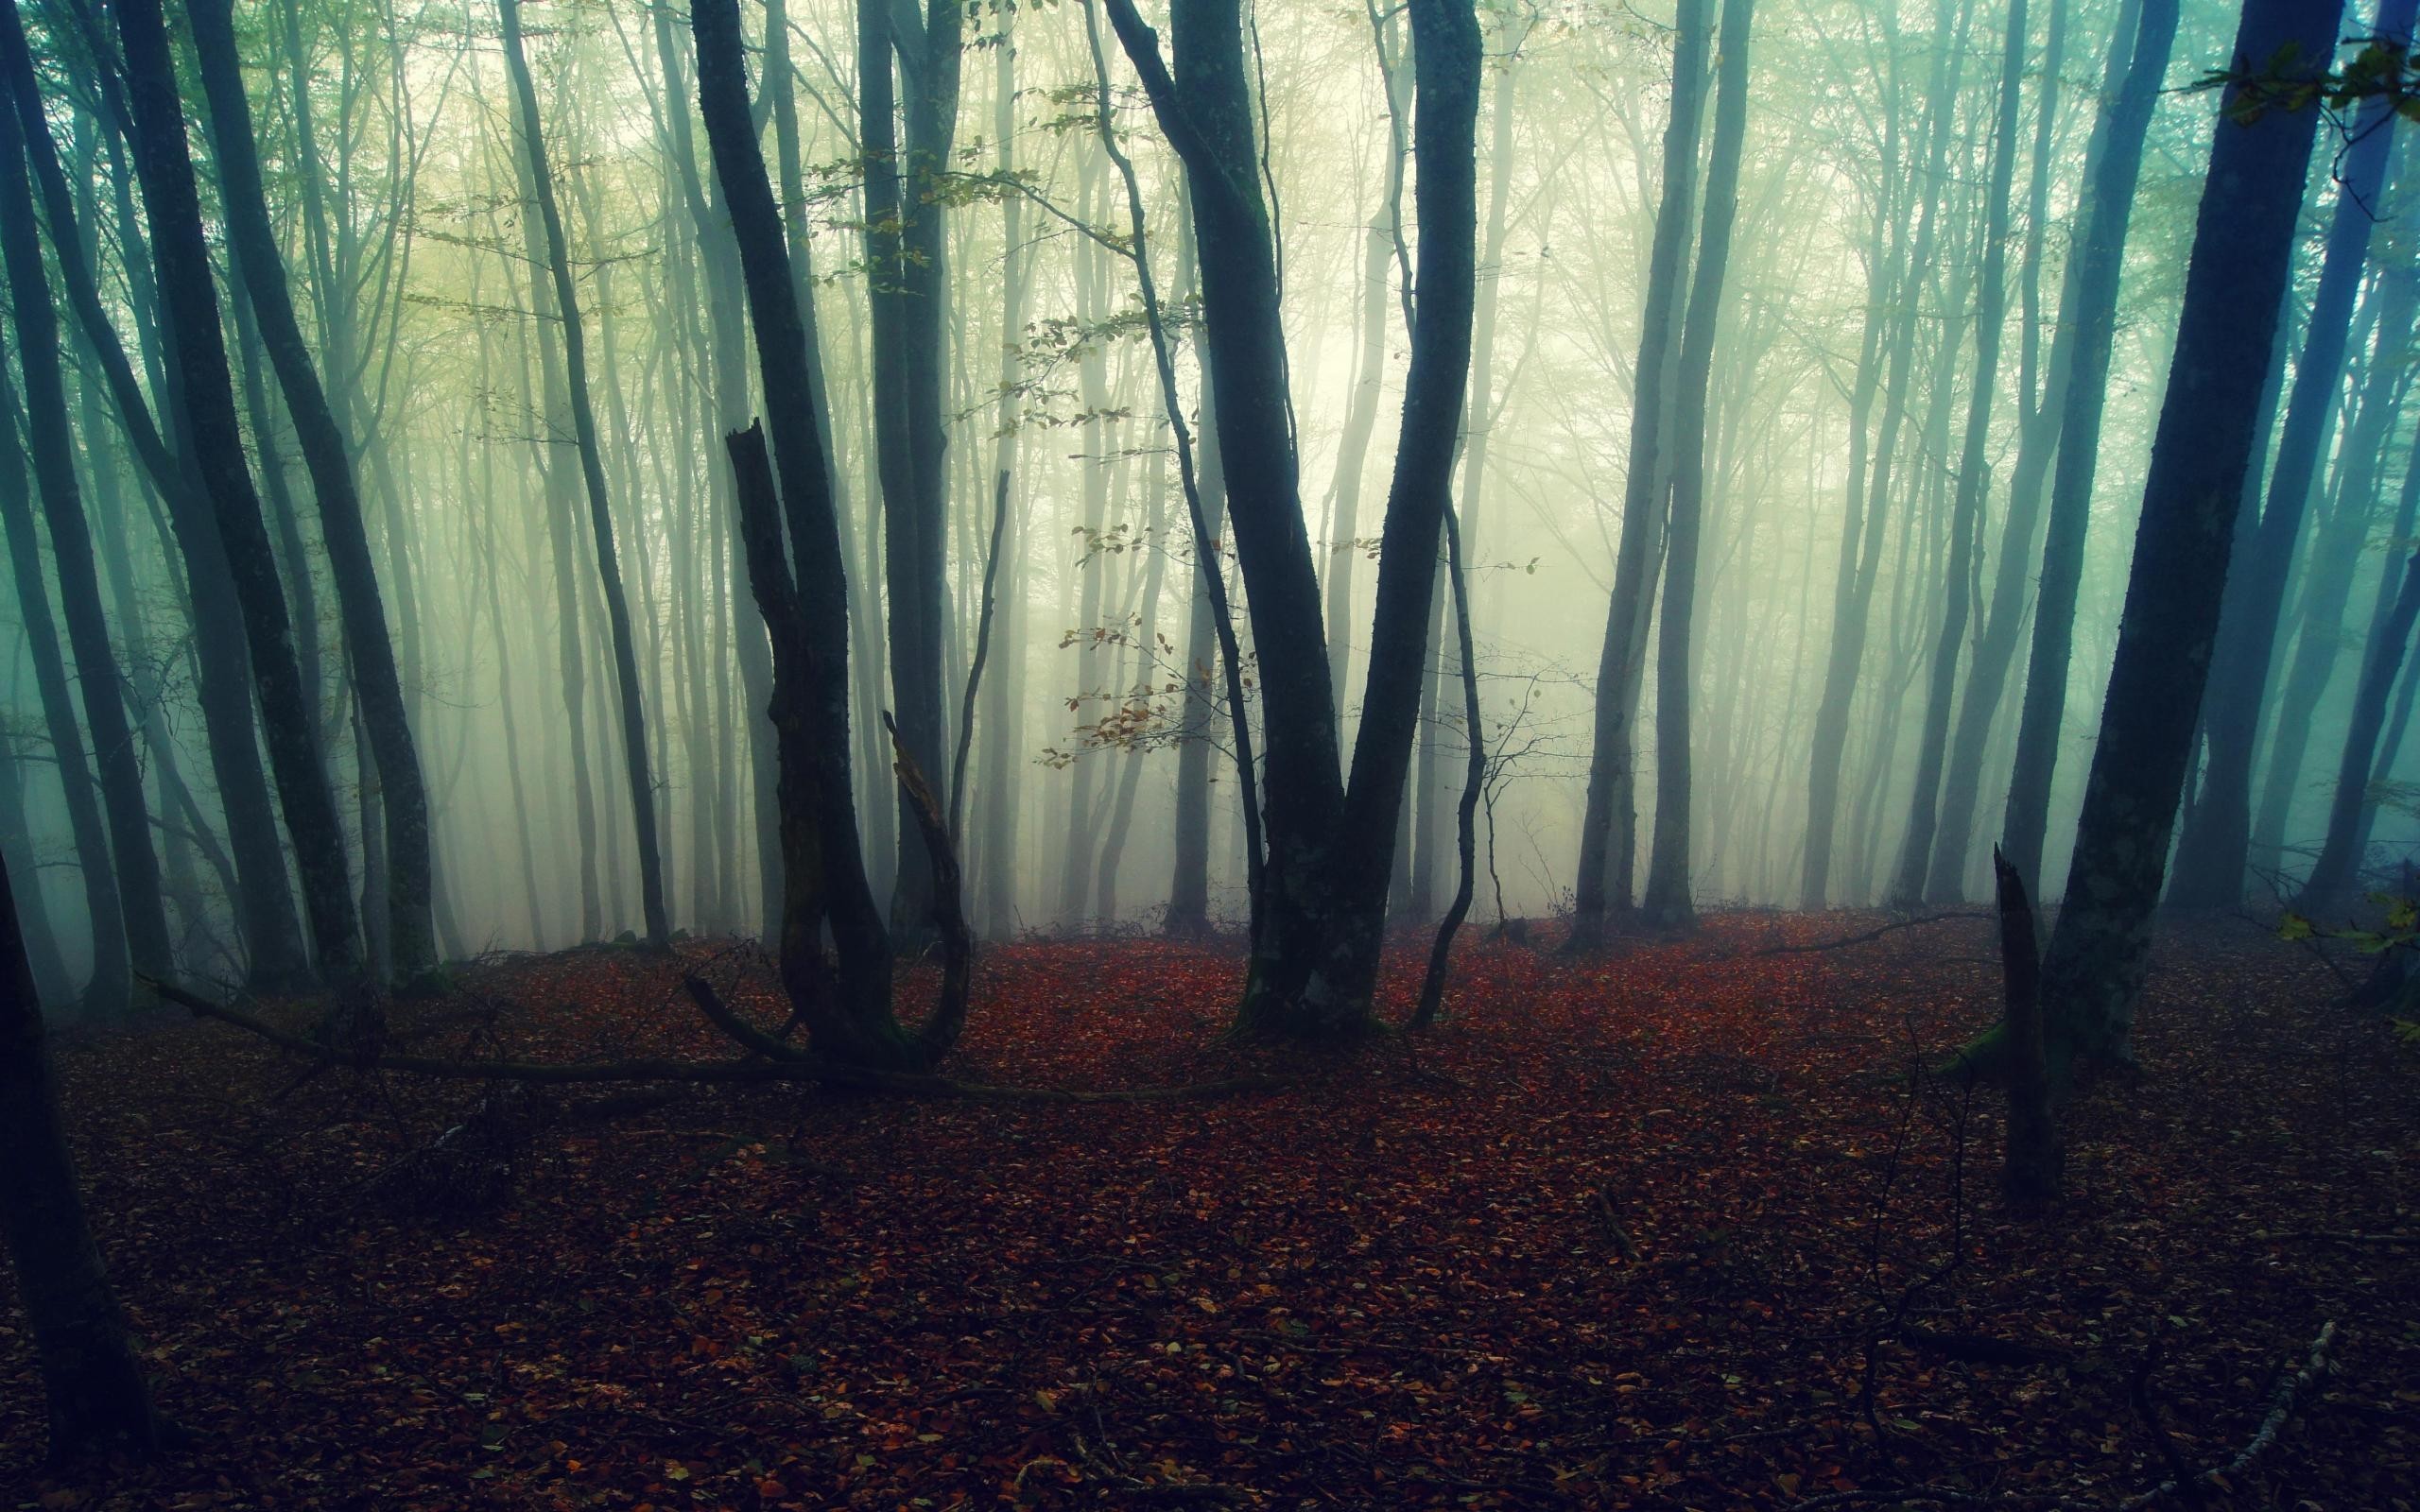 General 2560x1600 forest fall mist gloomy trees outdoors plants